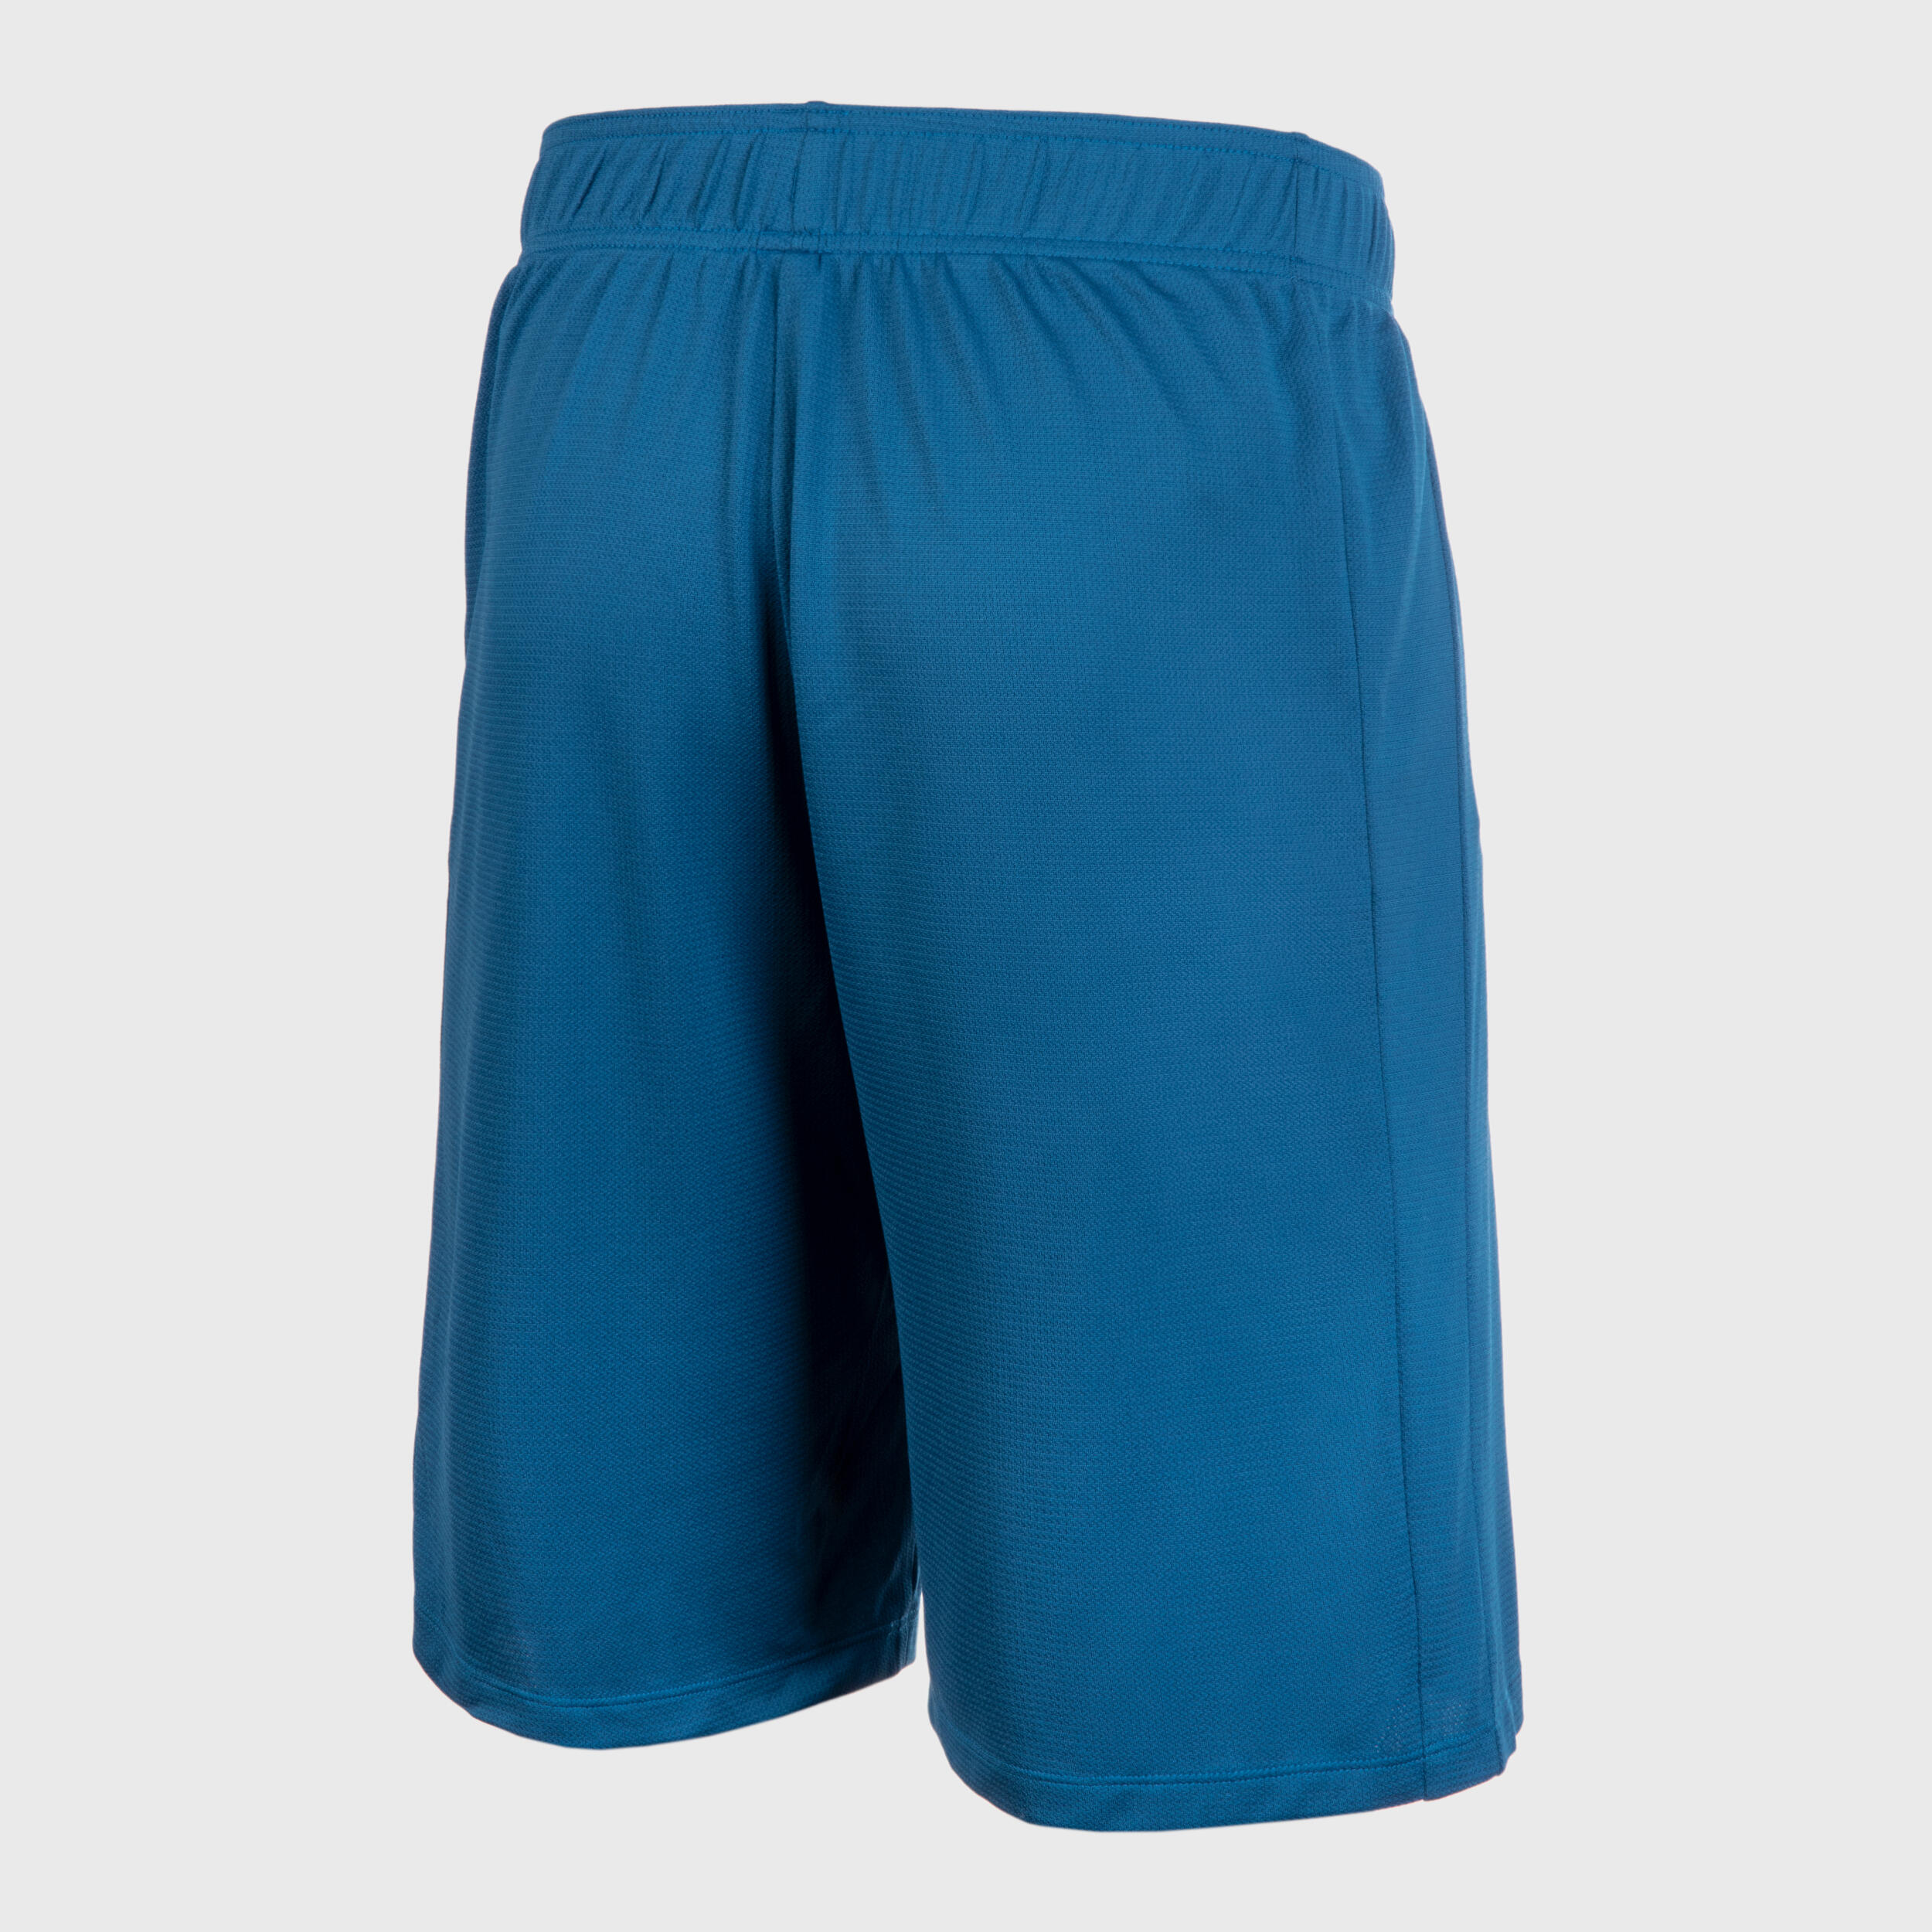 All in Motion Boys' Basketball Shorts, Turquoise Small (6/7), 2